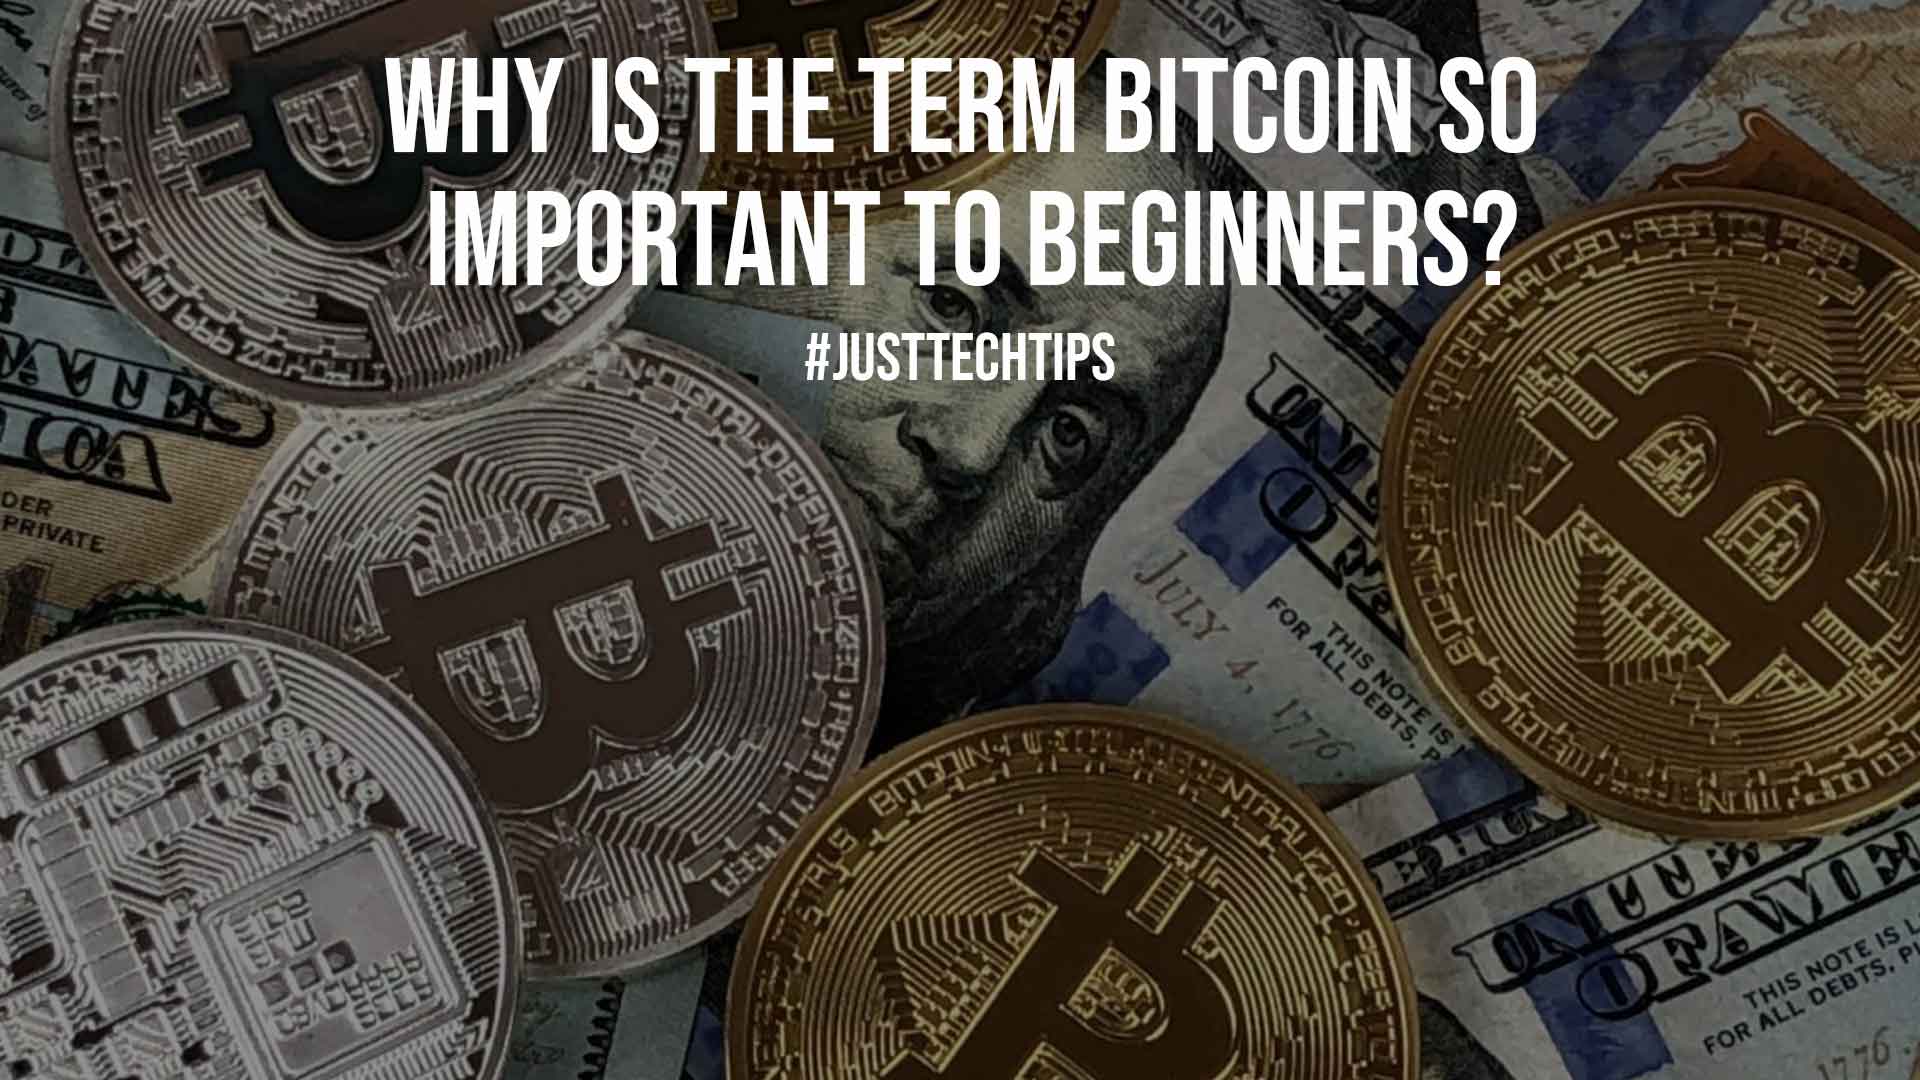 Why is the Term Bitcoin So Important to Beginners